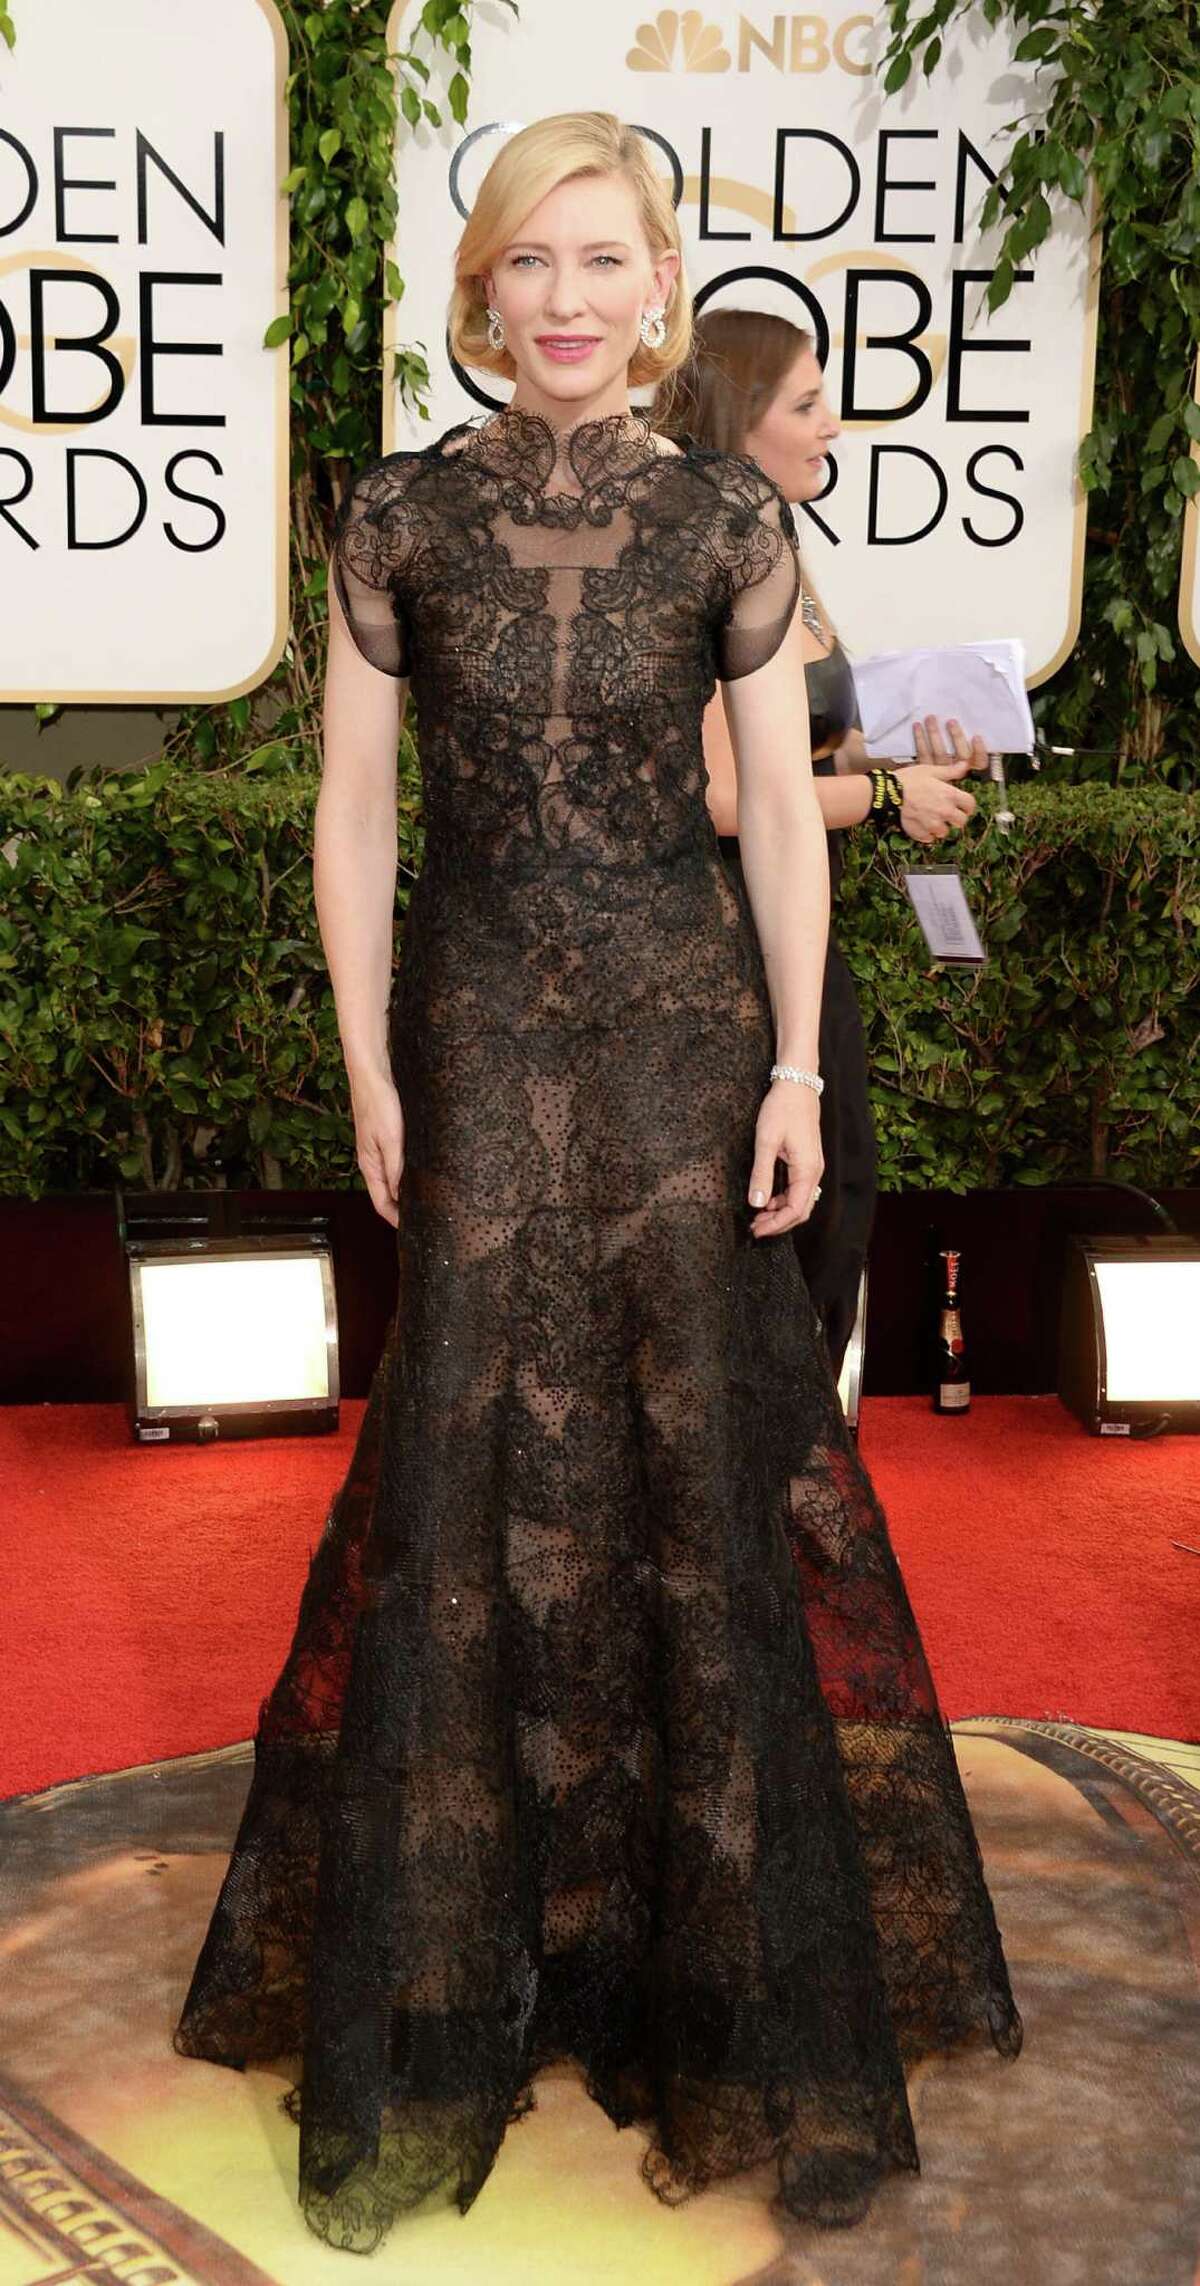 The front of Cate Blanchett's black sheer lace gown is seriously dramatic, but the backside definitely says risqué.